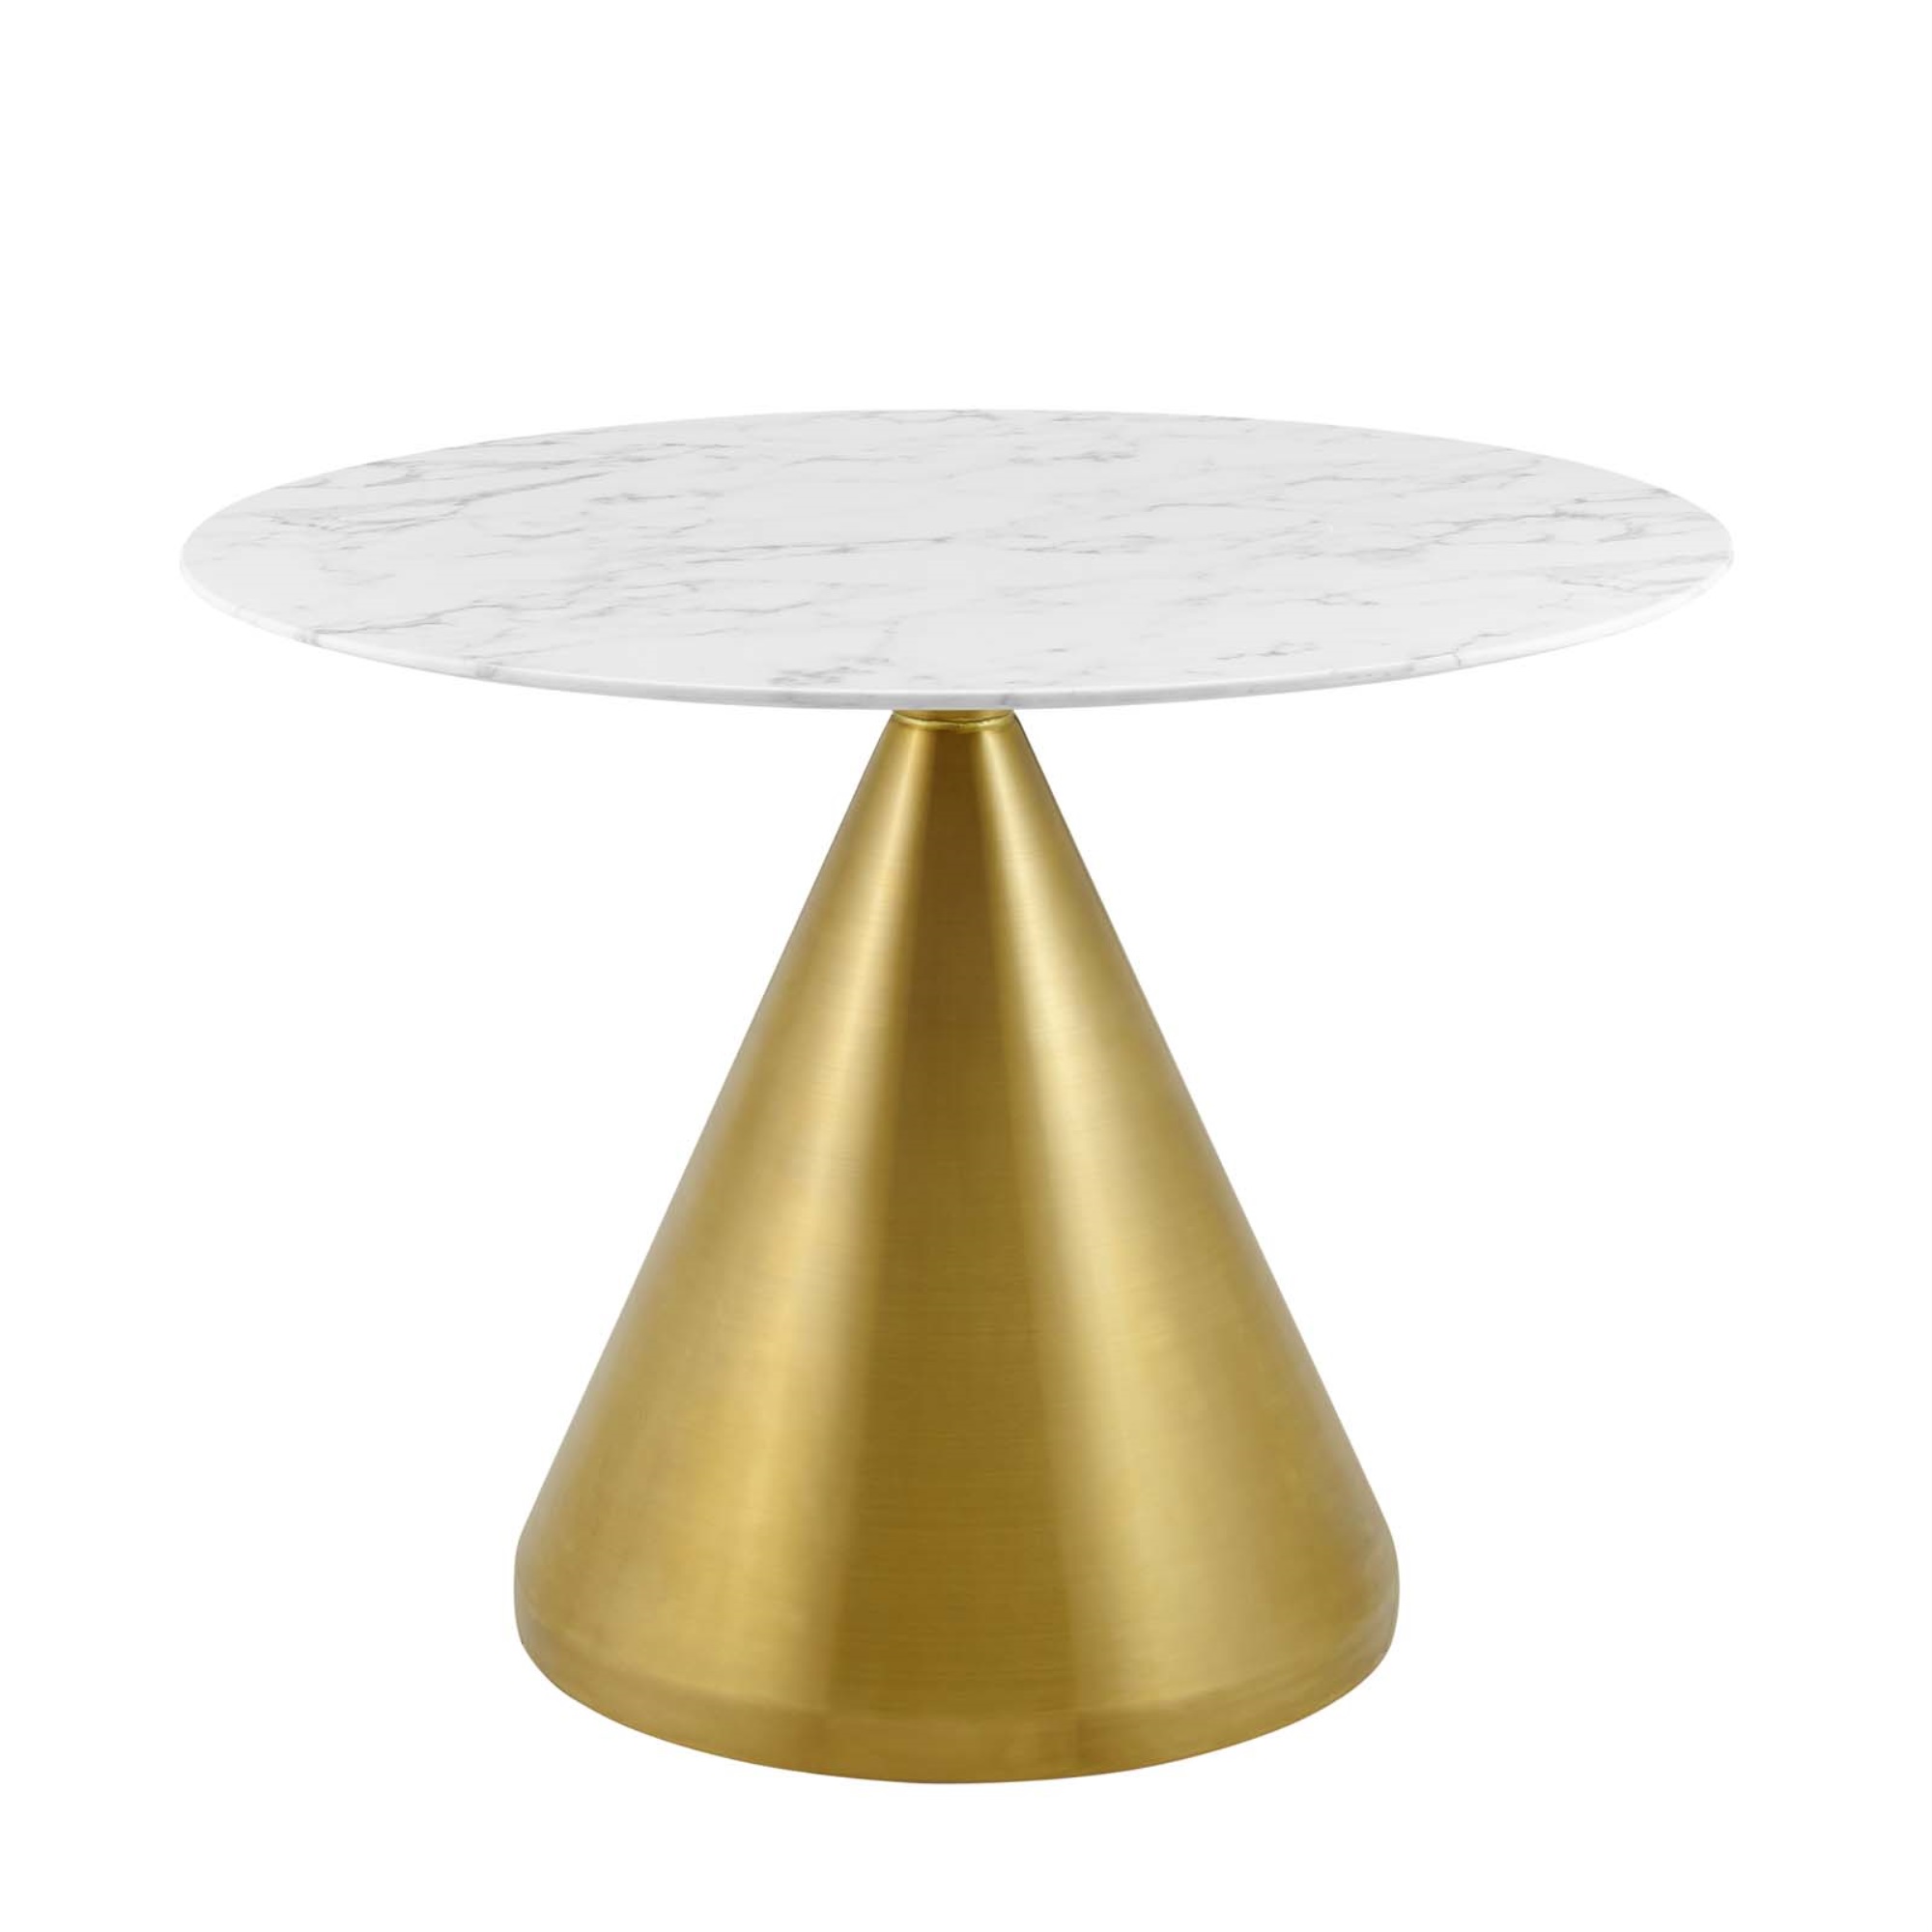 Ergode Tupelo 40" Artificial Marble Dining Table - Gold White